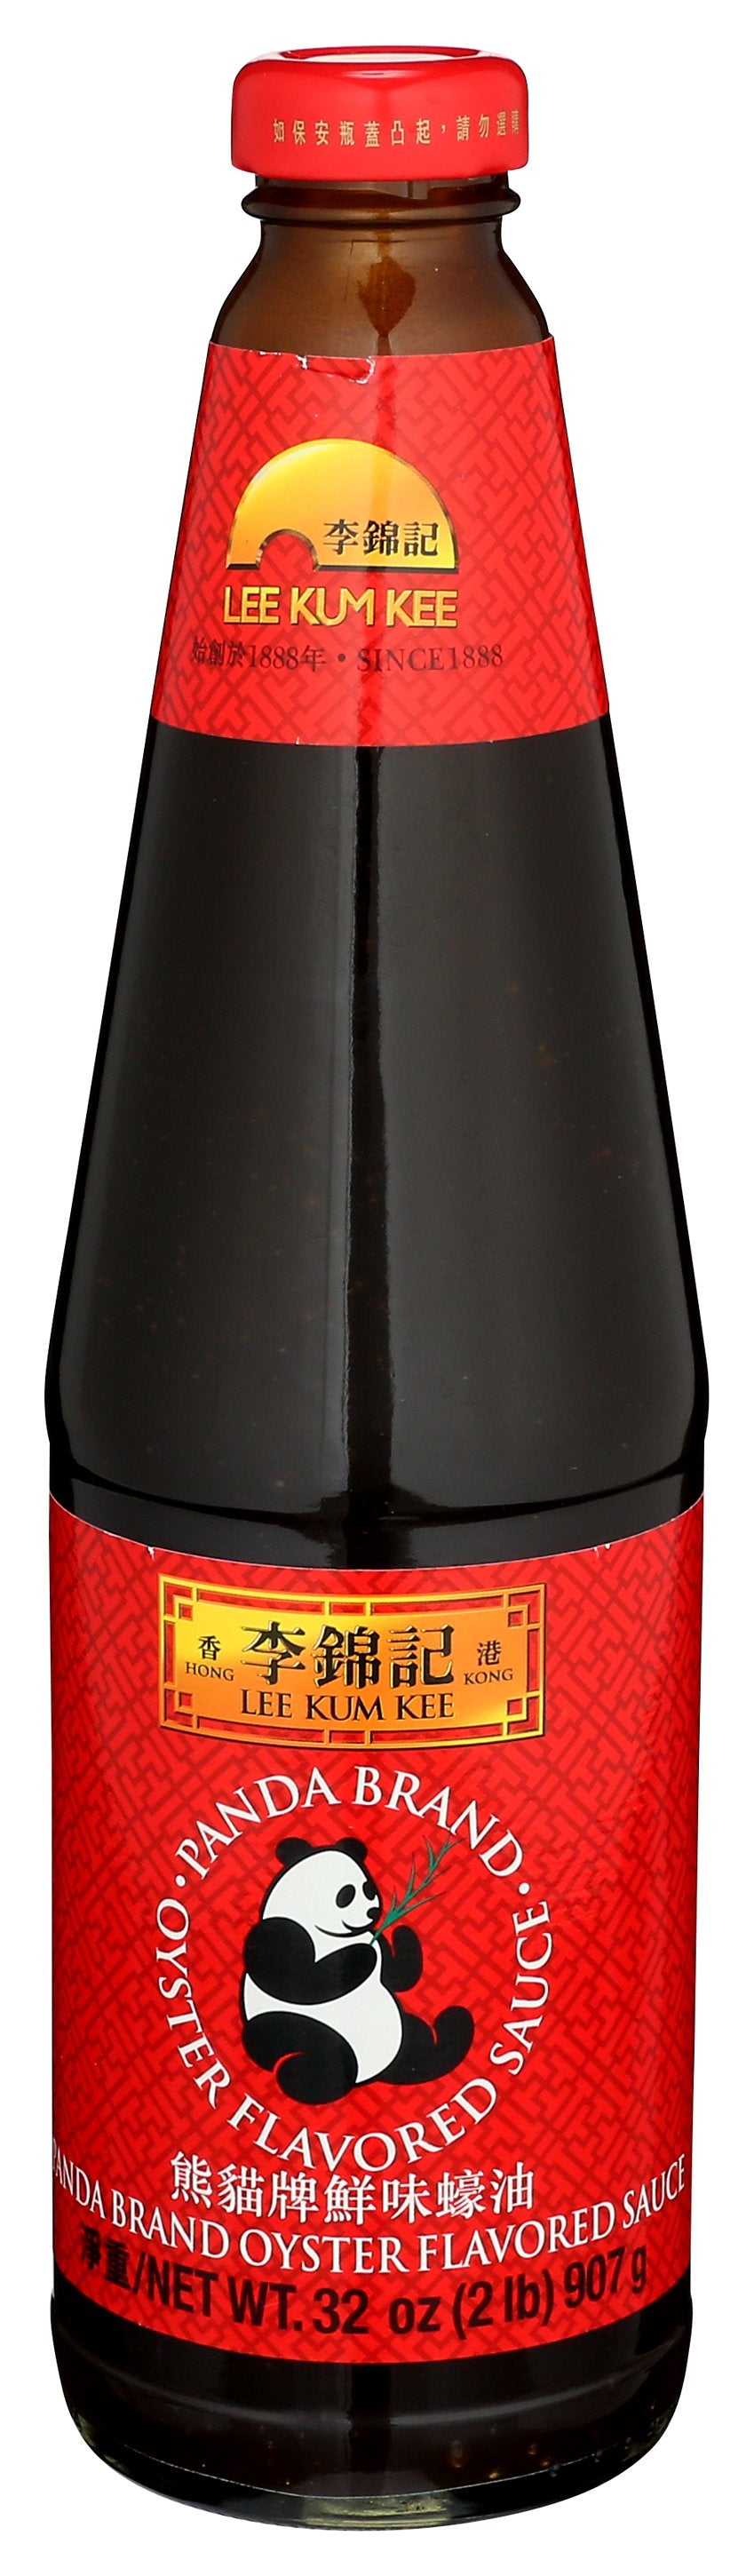 LEE KUM KEE PANDA SAUCE OYSTER - Case of 12 [PANDA BRAND OYSTER FLAVORED SAUCE - 32 OZ]